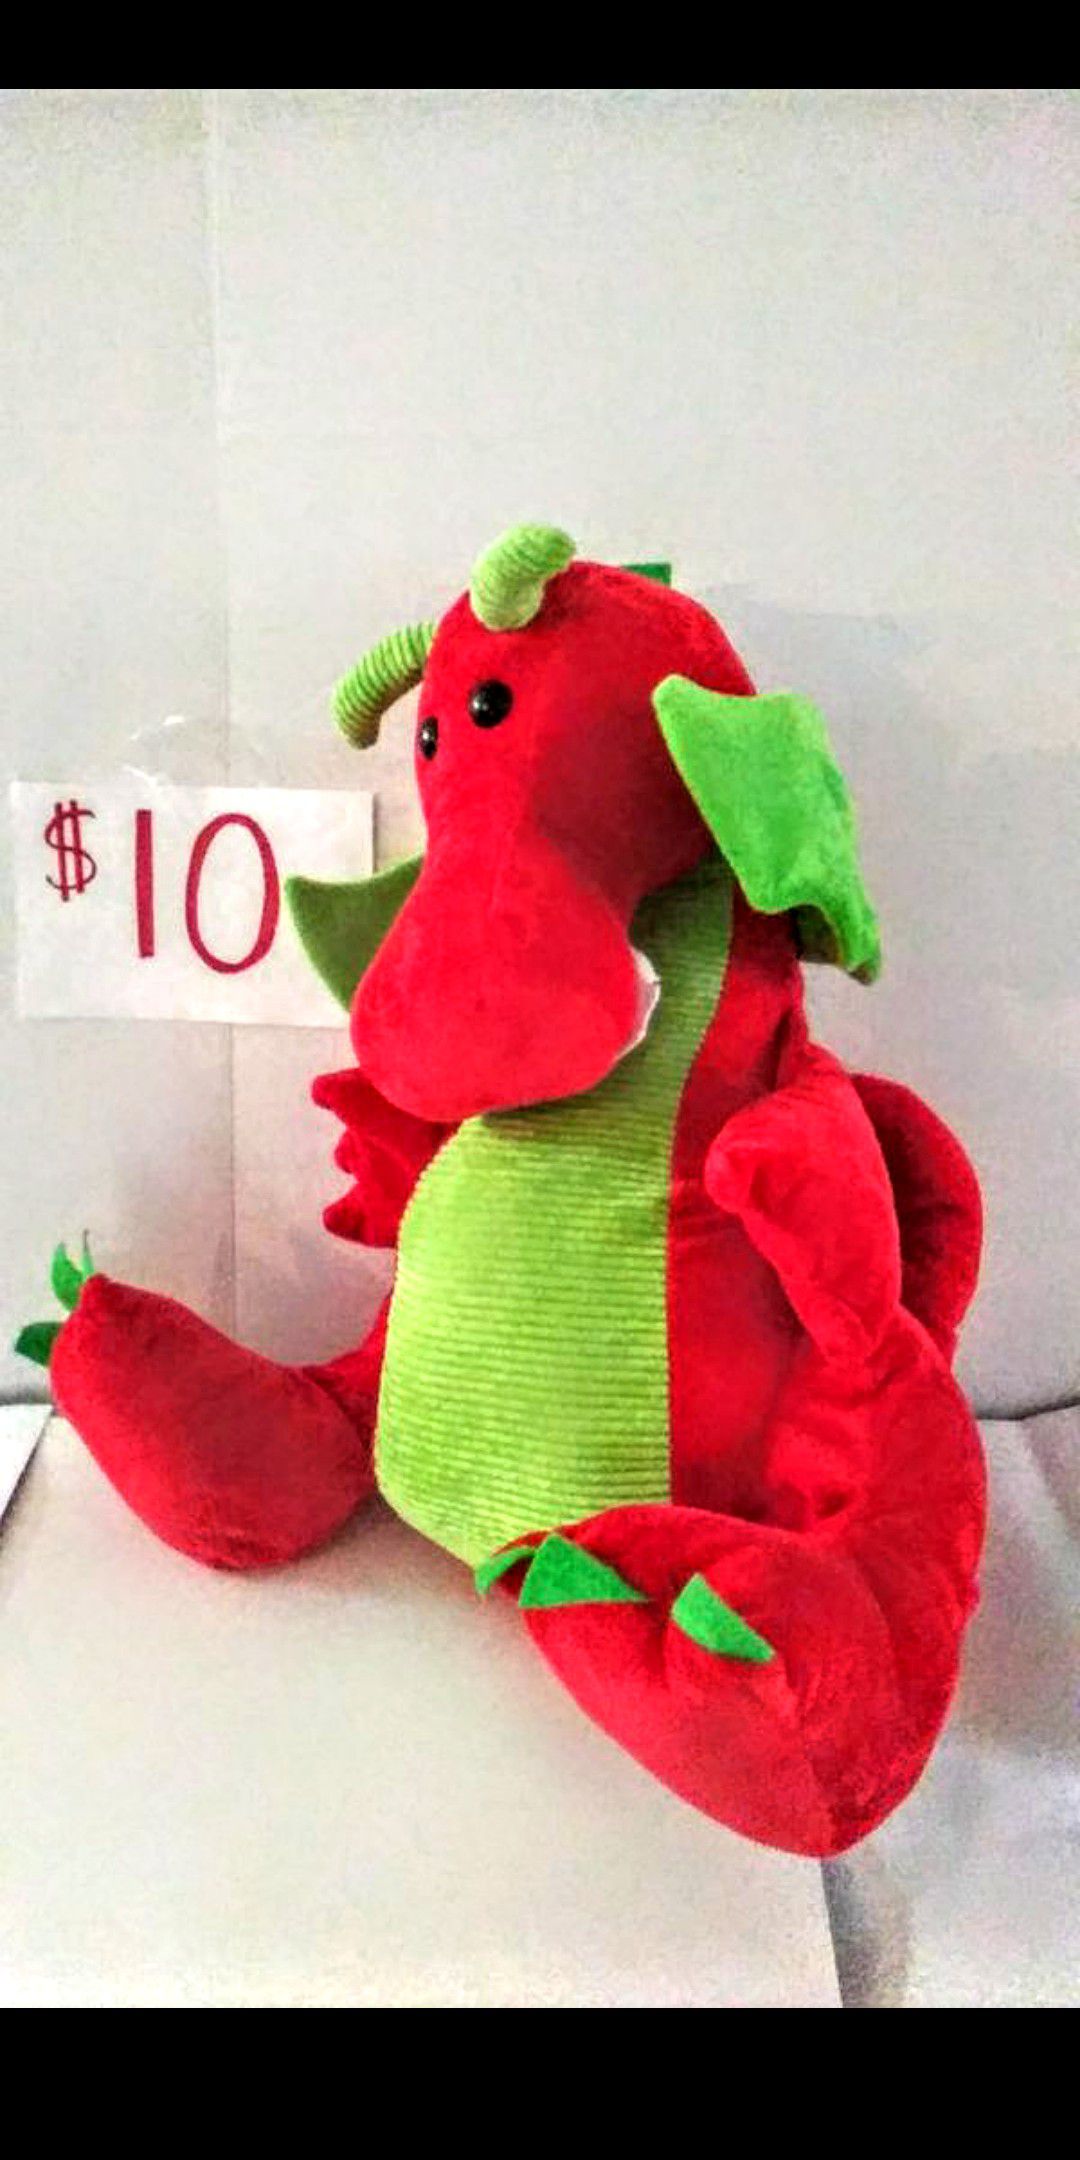 Brand new beautiful soft with corduroy red and green dragon stuffed animal boy girl toy super nice!Valentines day!!Huge